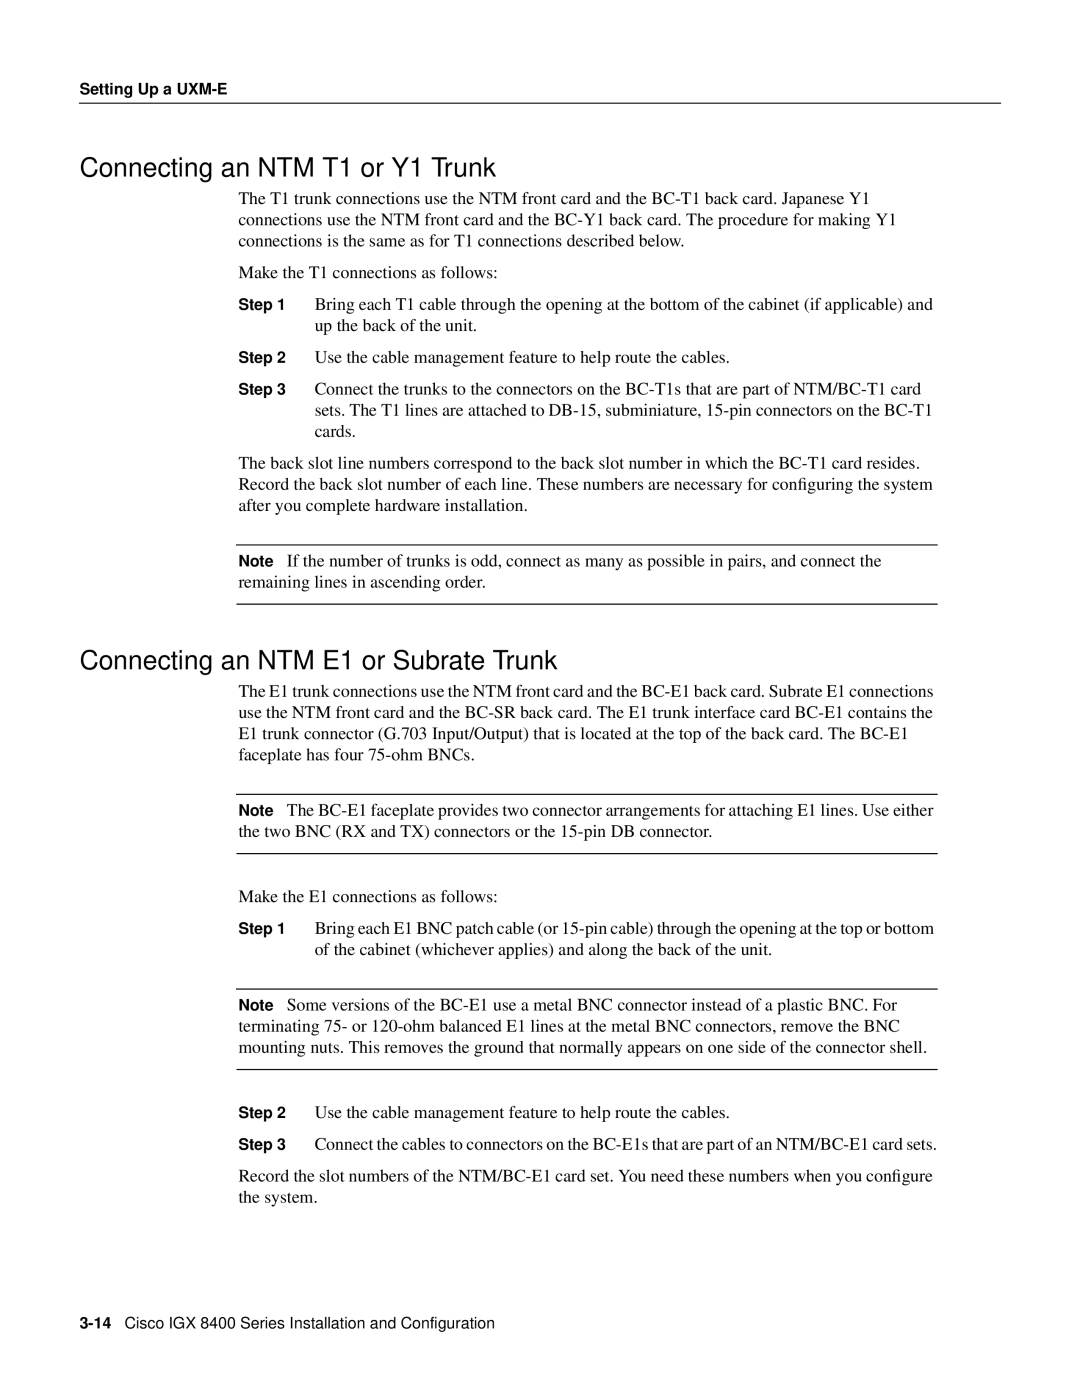 Cisco Systems IGX 8400 Series manual Connecting an NTM T1 or Y1 Trunk, Connecting an NTM E1 or Subrate Trunk 